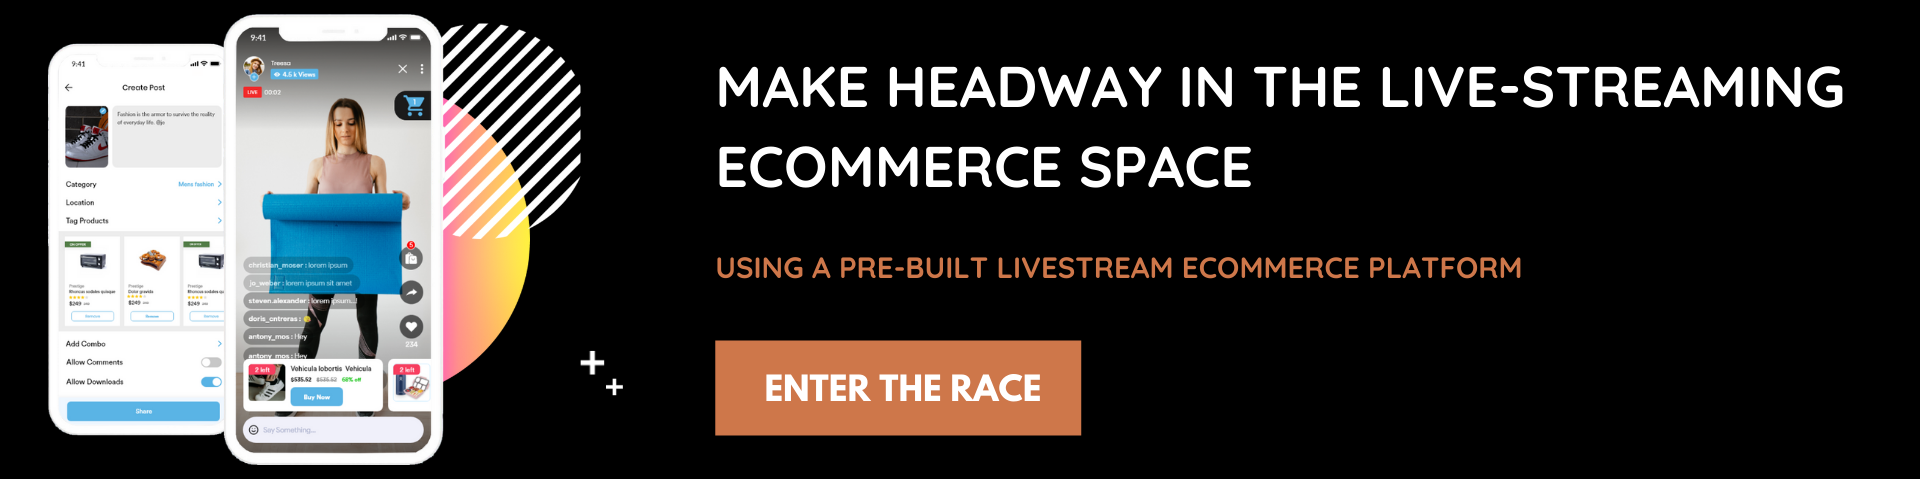 Livestream Ecommerce: An Eruption Beyond Every Prediction 